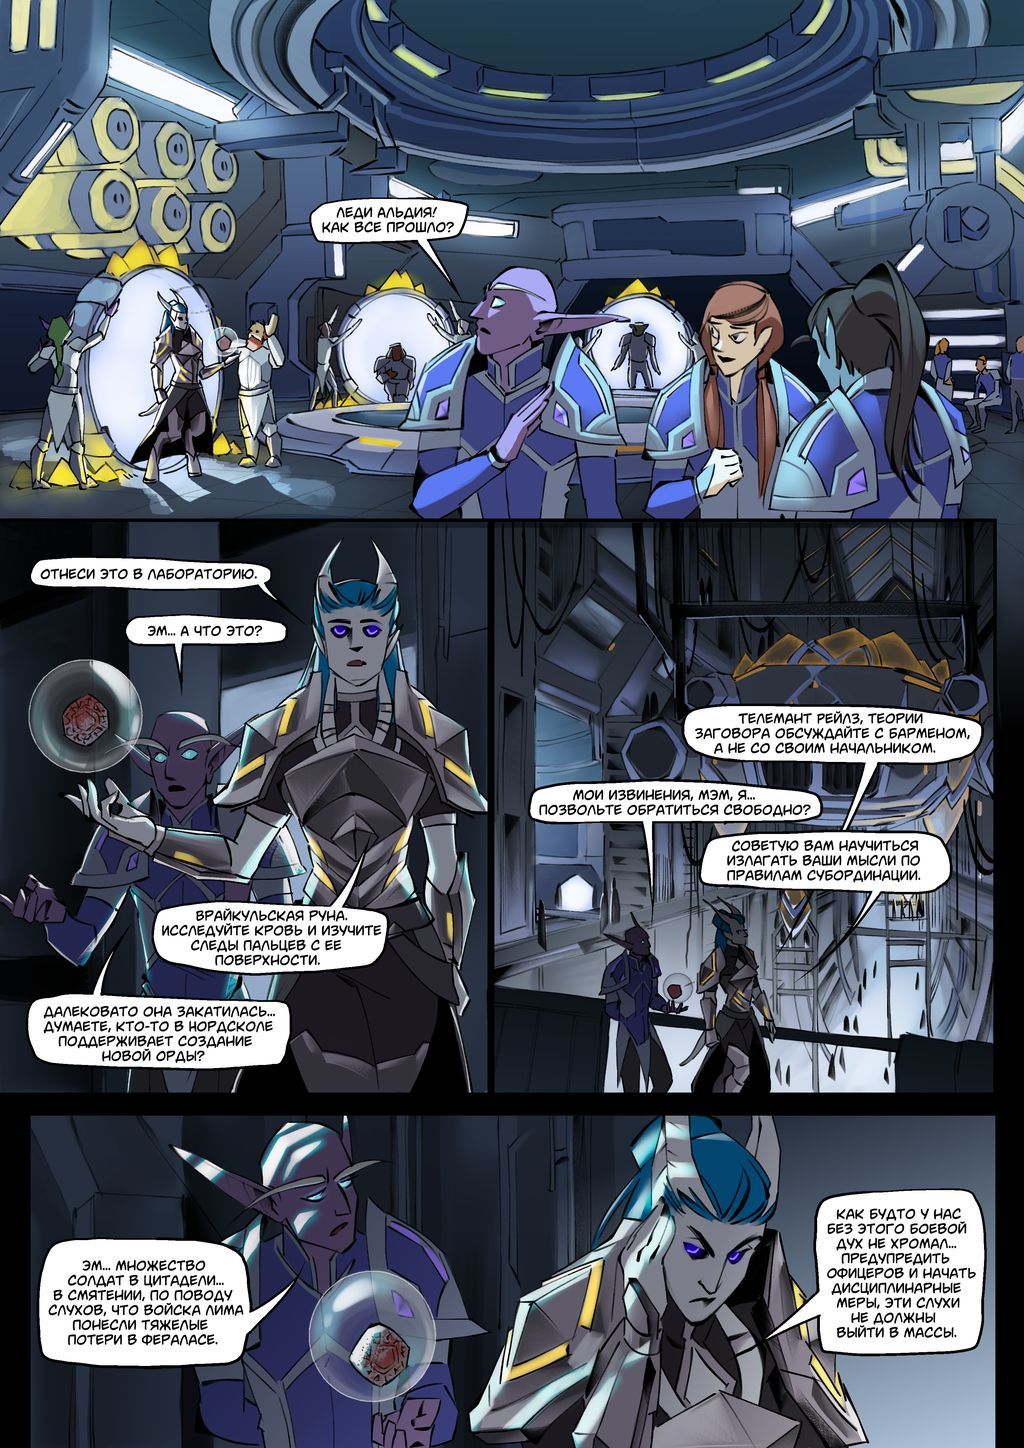 Warcraft Lightreaver comic, Chapter 3 (pages 9-21 FINAL CHAPTER) - My, World of warcraft, Lightreaver, Comics, Action, Drama, Science fiction, Fantasy, Longpost